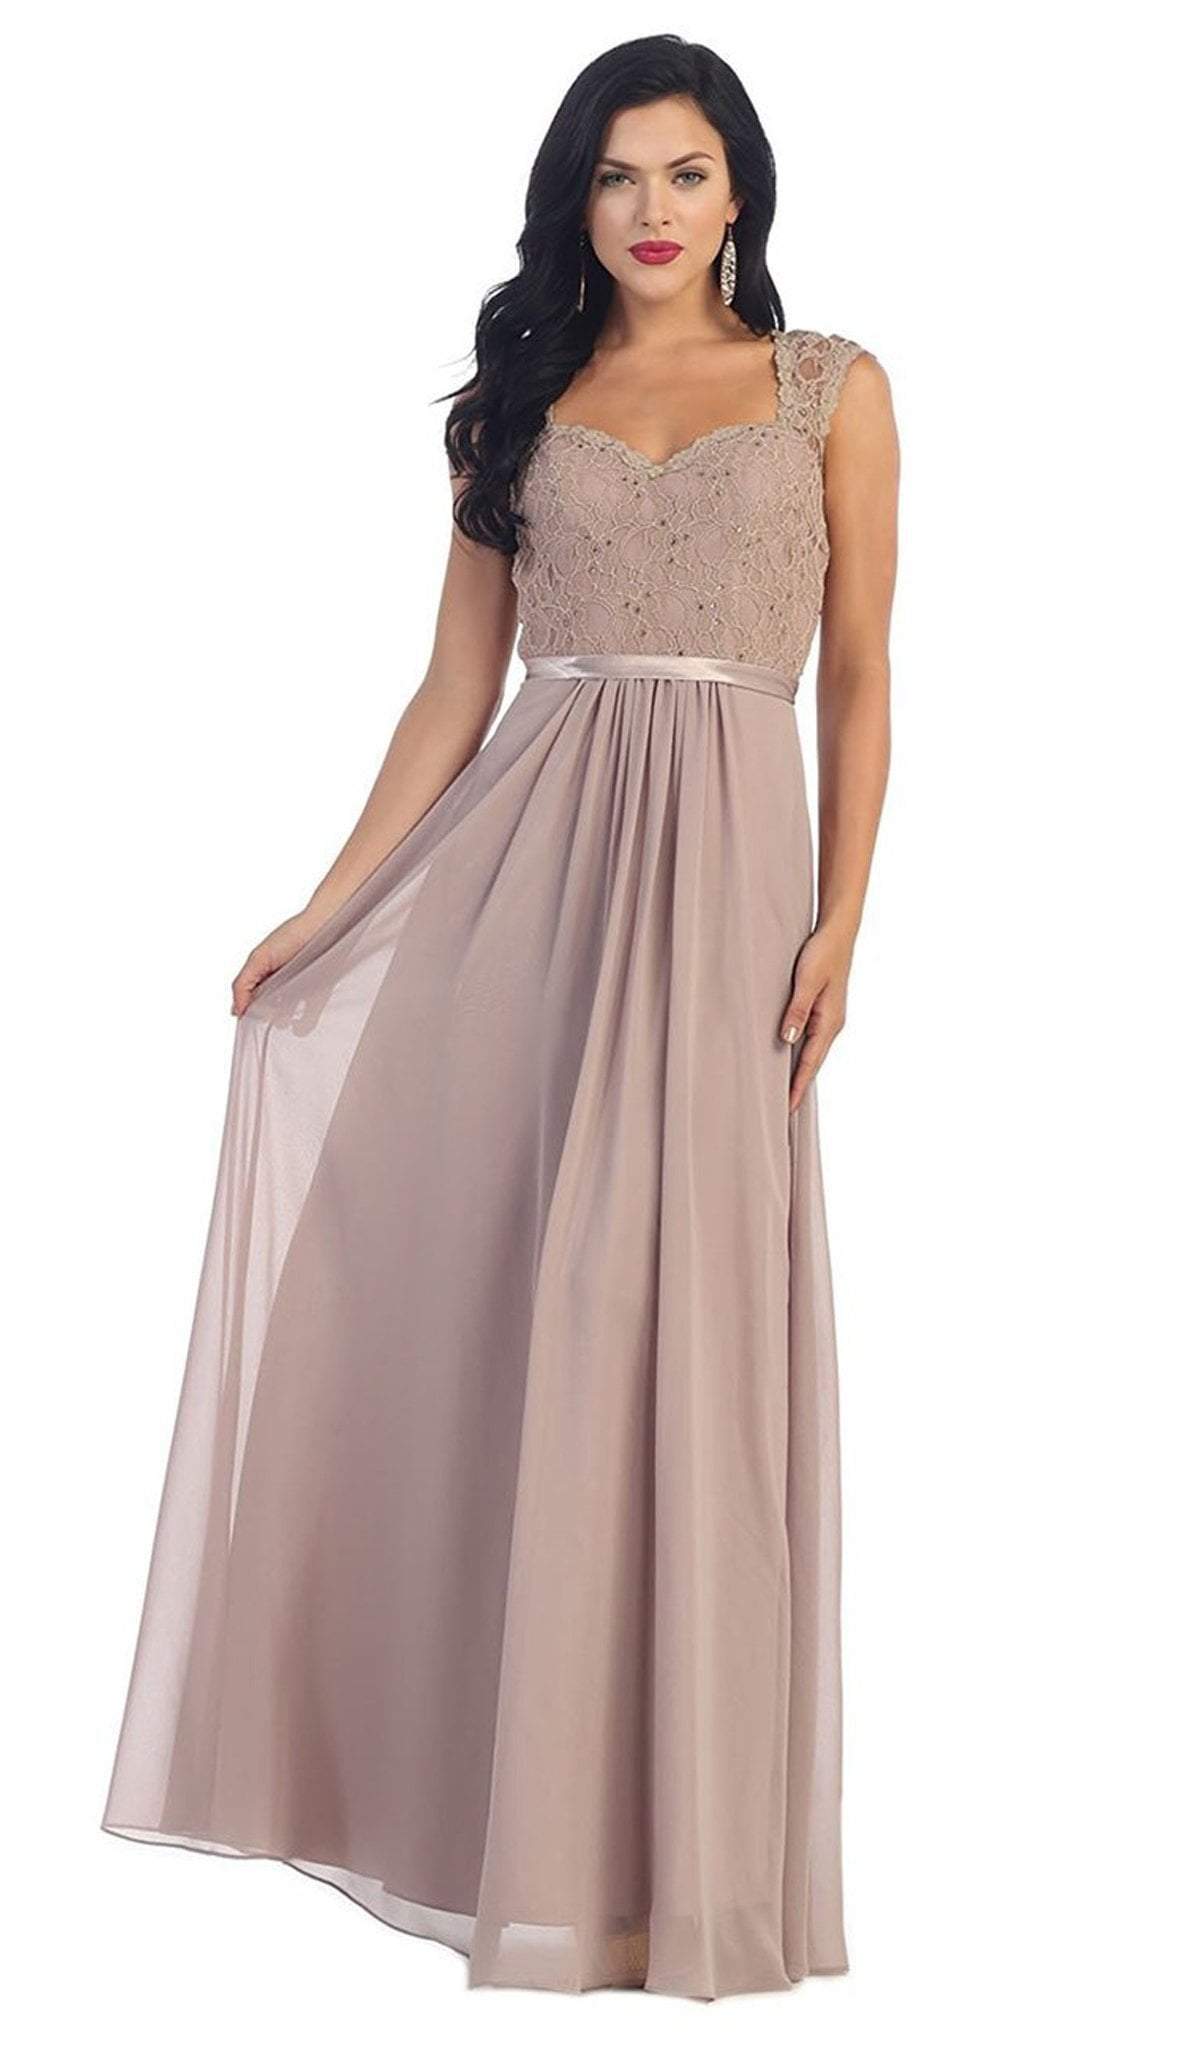 May Queen - Stunning Embellished Sweetheart Neck Chiffon A-Line Evening Dress Special Occasion Dress 4 / Mocha